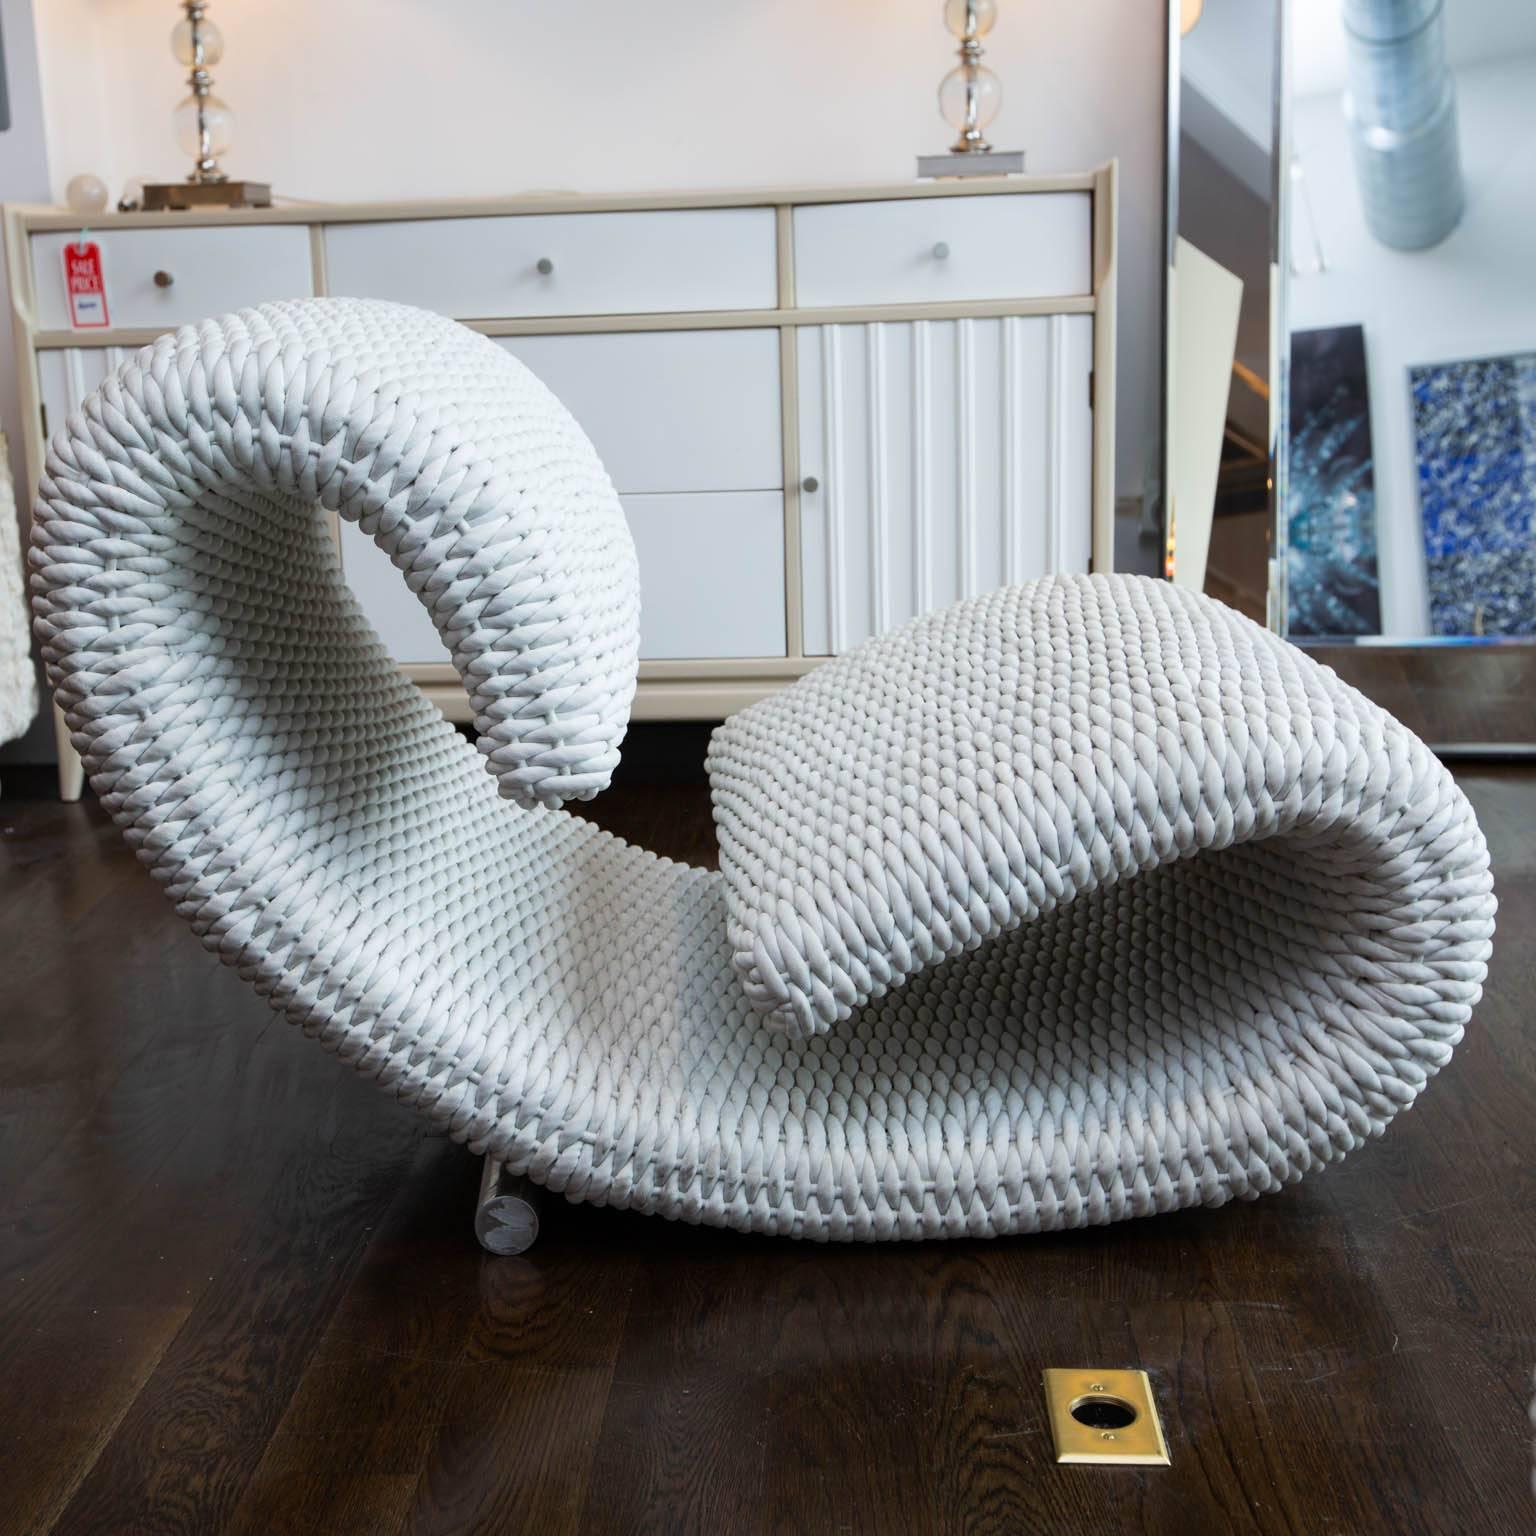 Contemporary Biomorphic Lounge Chairs in Woven Leather